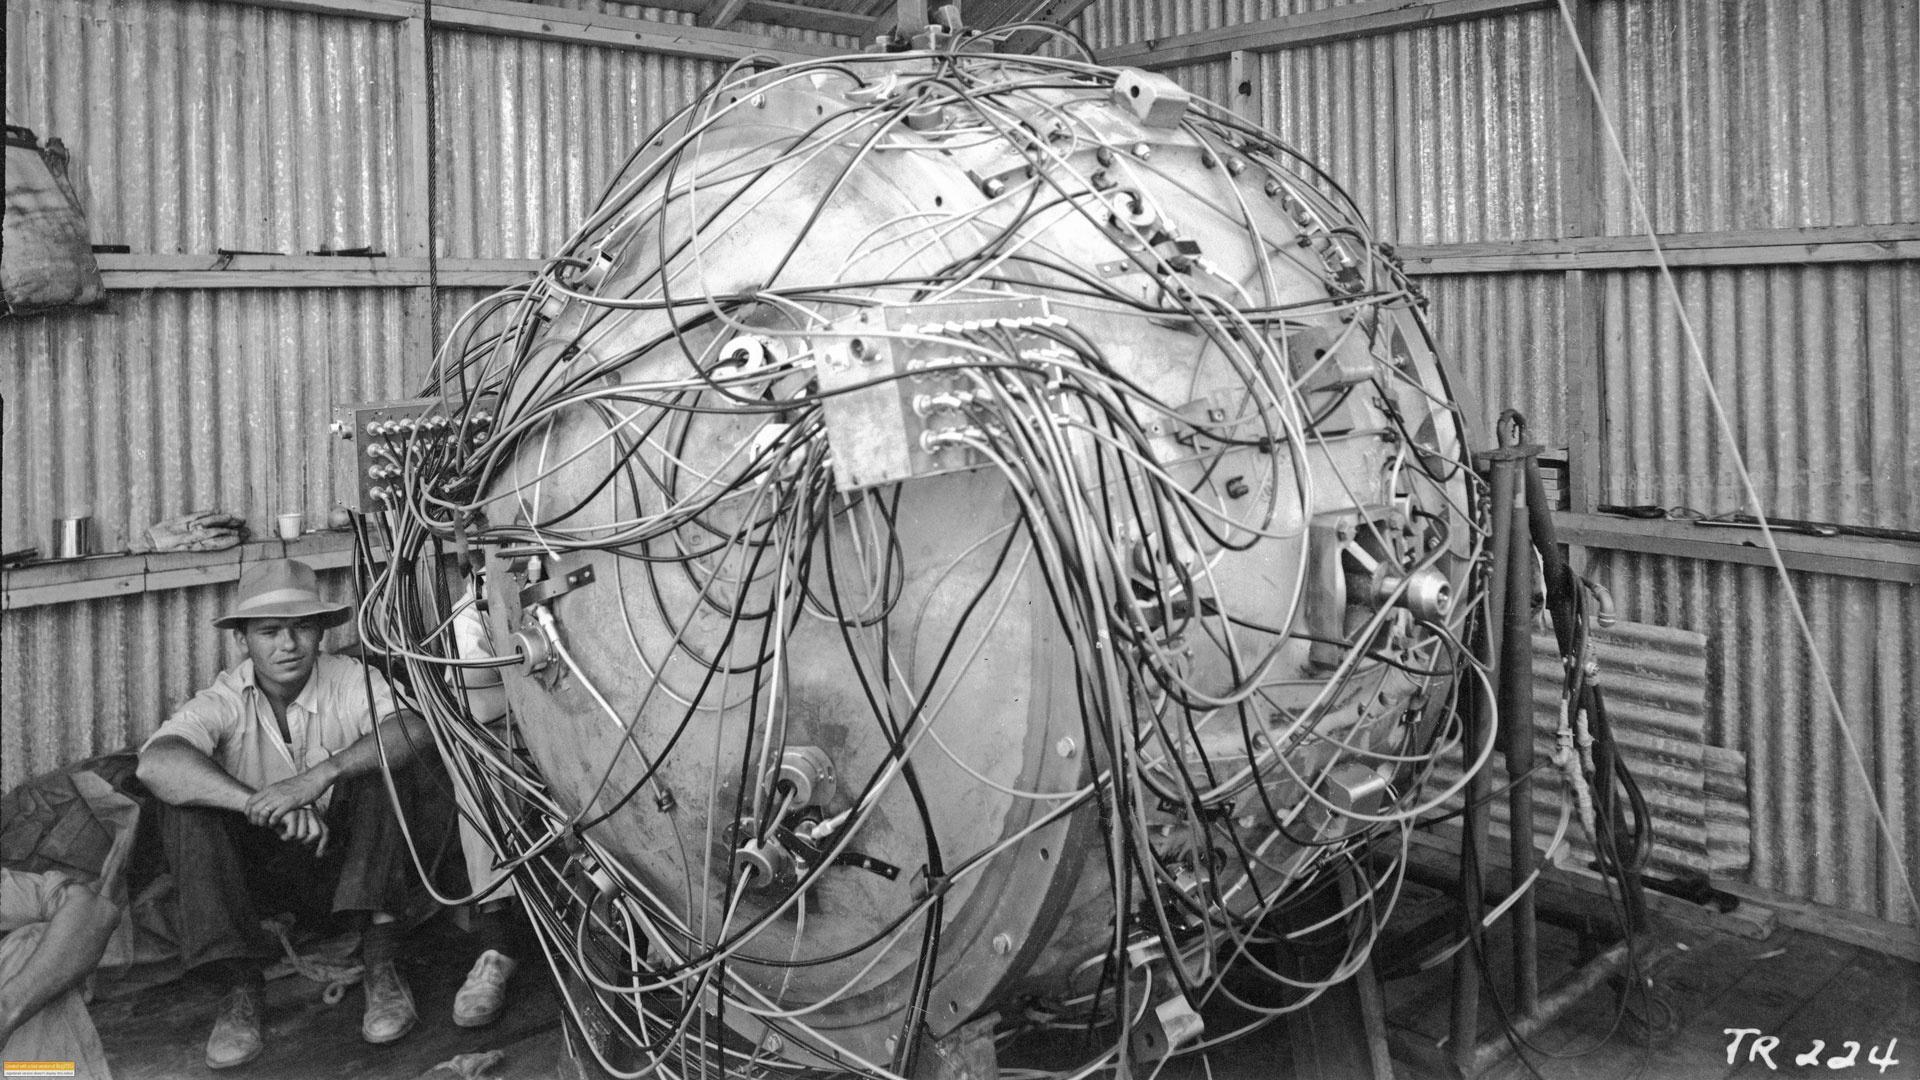 The atomic bomb, “The Gadget,” on the evening of the Trinity test in 1945.